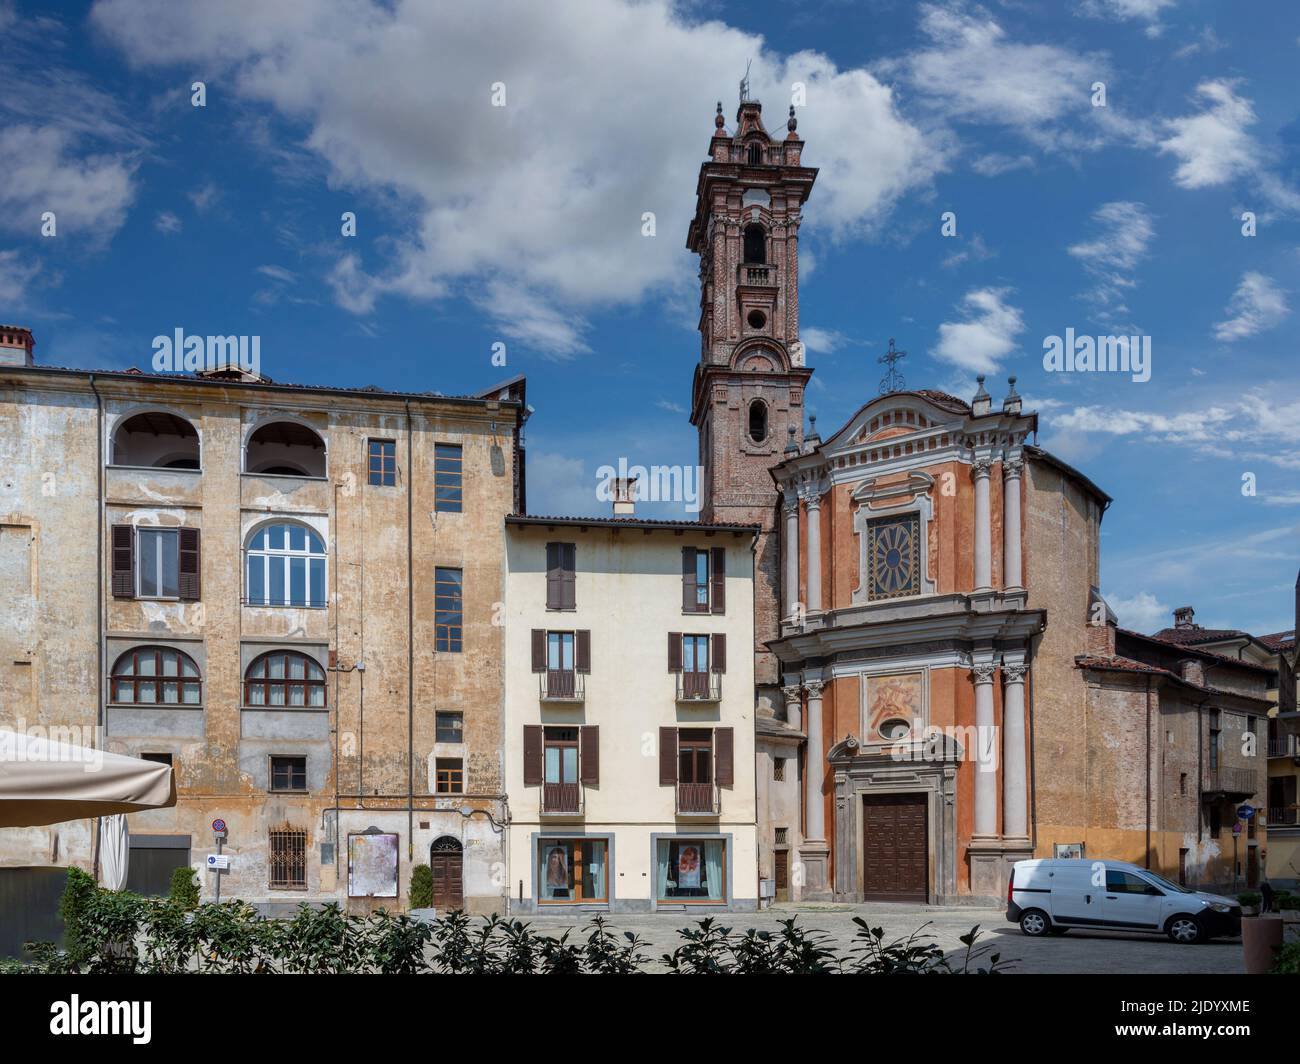 Savigliano, Cuneo, Piedmont, Italy - May 04, 2022: Church of the Confraternity of the Pietà with ancient buildings in Cesare Battisti square on blue s Stock Photo